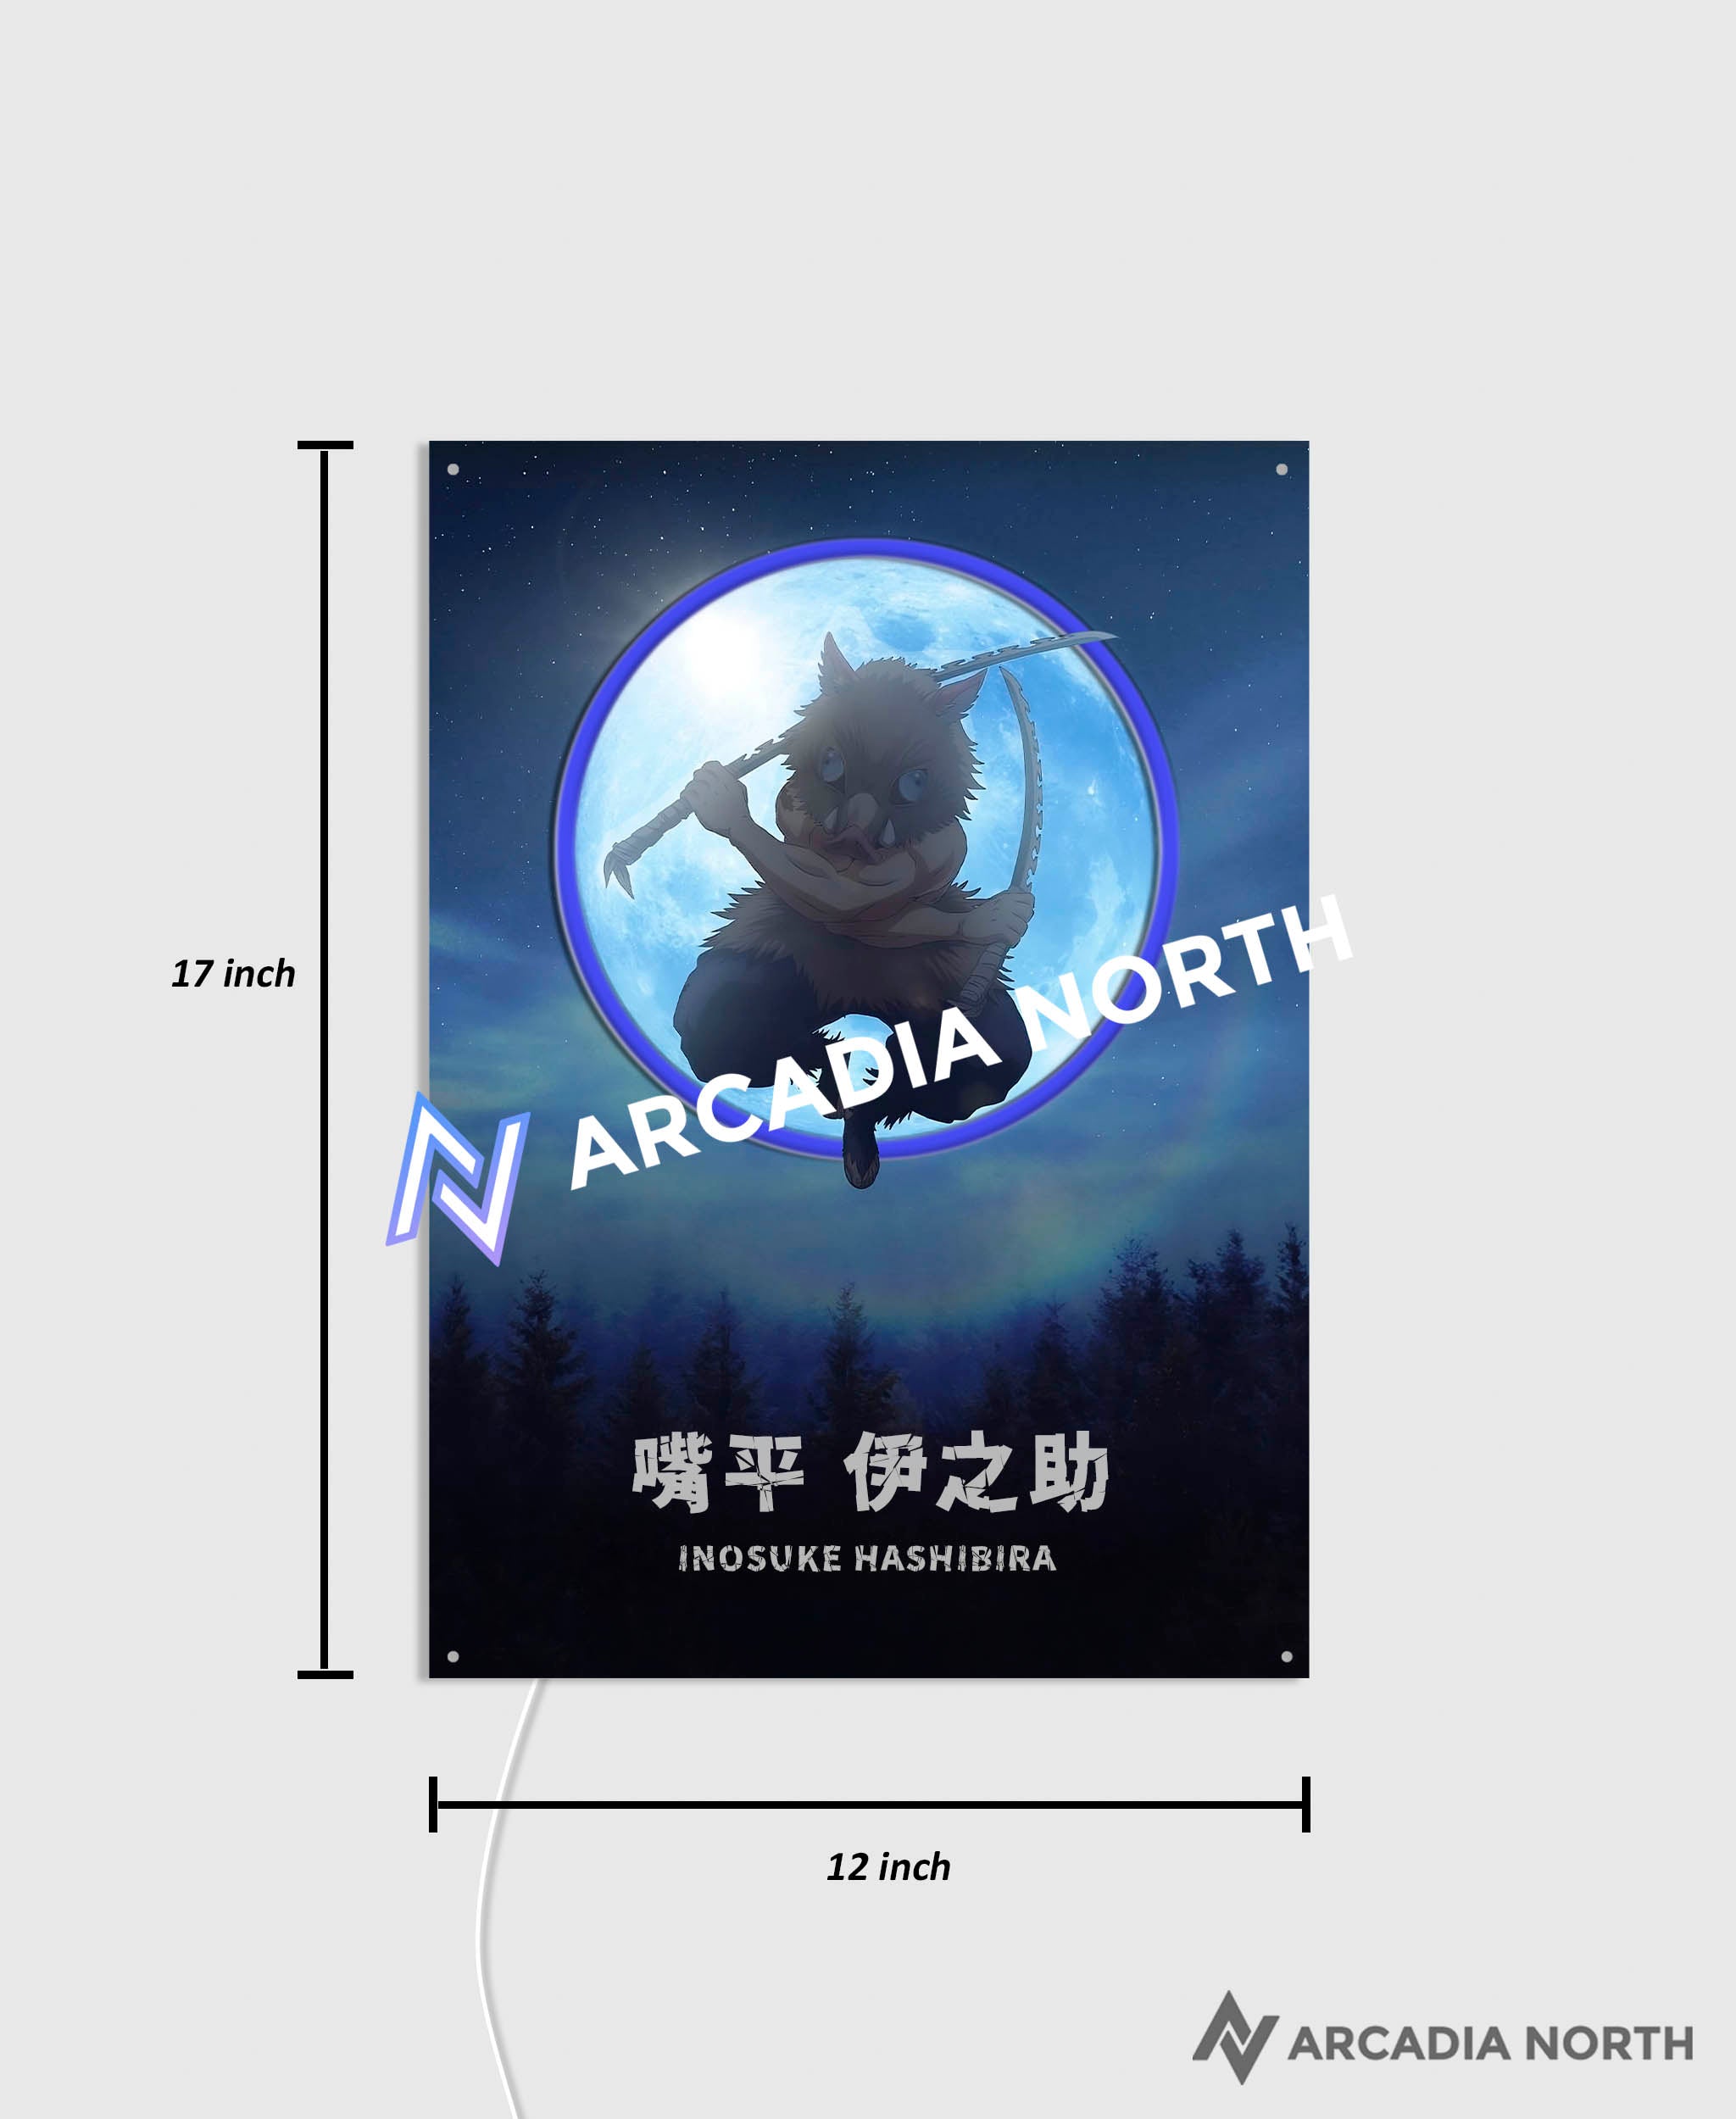 Arcadia North AURALIGHT Original LED Poster featuring the anime Demon Slayer with Inosuke Hashibira in front of a moon Illuminated by glowing neon LED lights. UV-printed on acrylic.